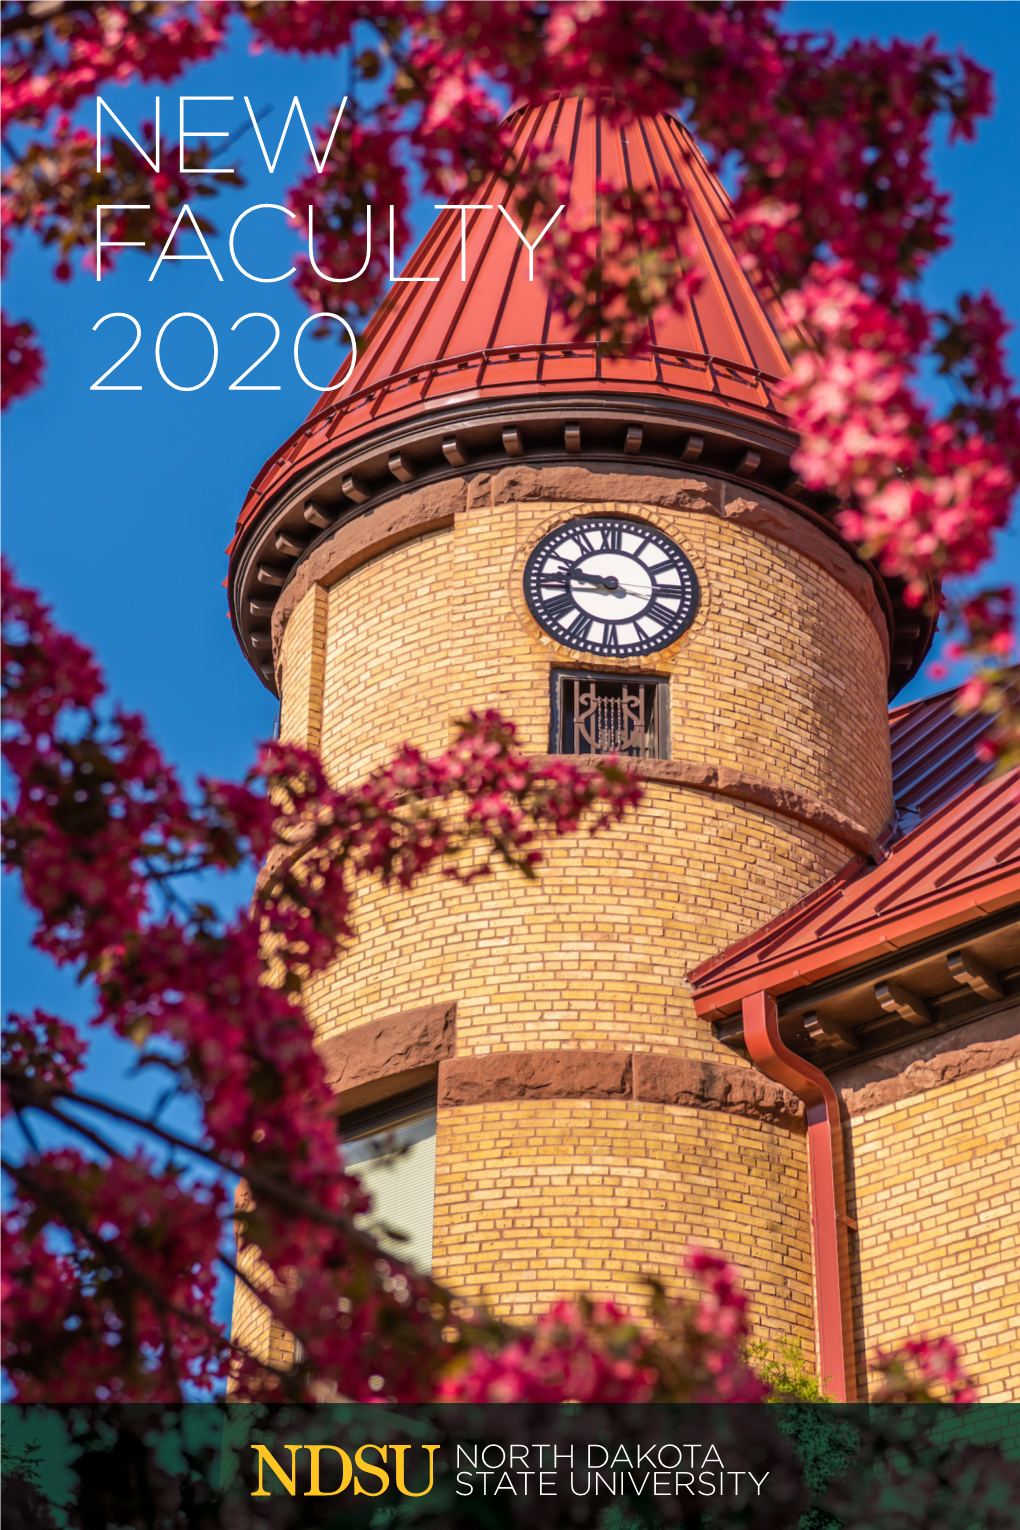 NEW FACULTY 2020 a Message from President Bresciani